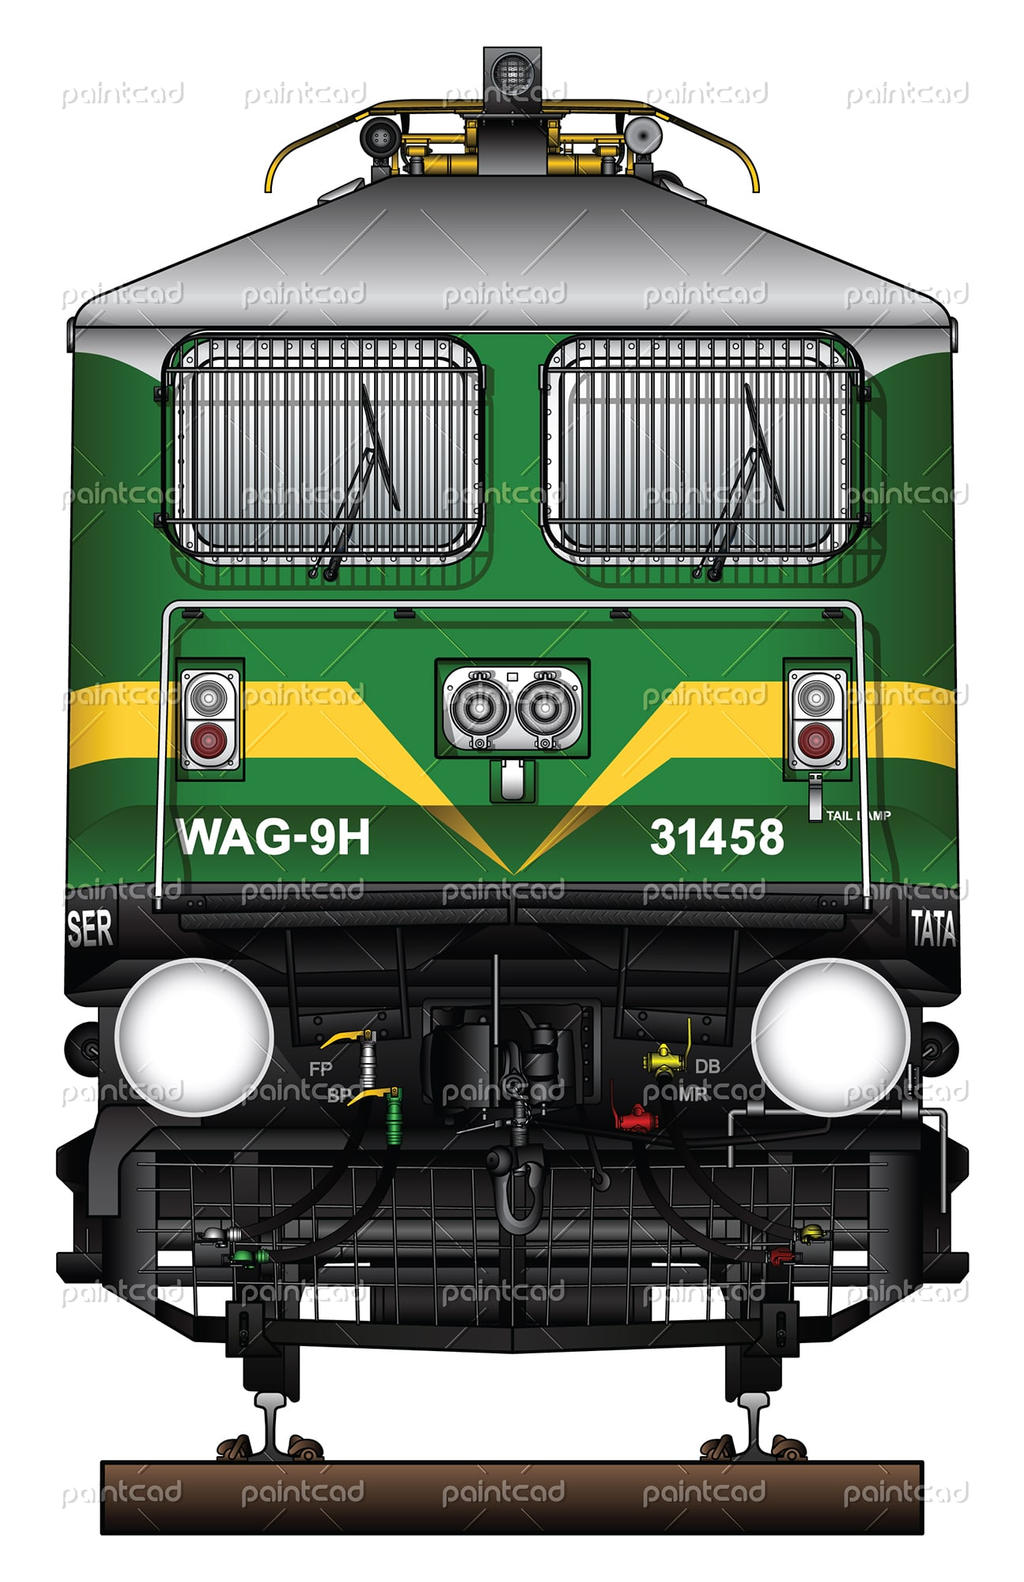 Indian Freight Locomotive Class Wag 9 With Electri By Paintcad On Deviantart